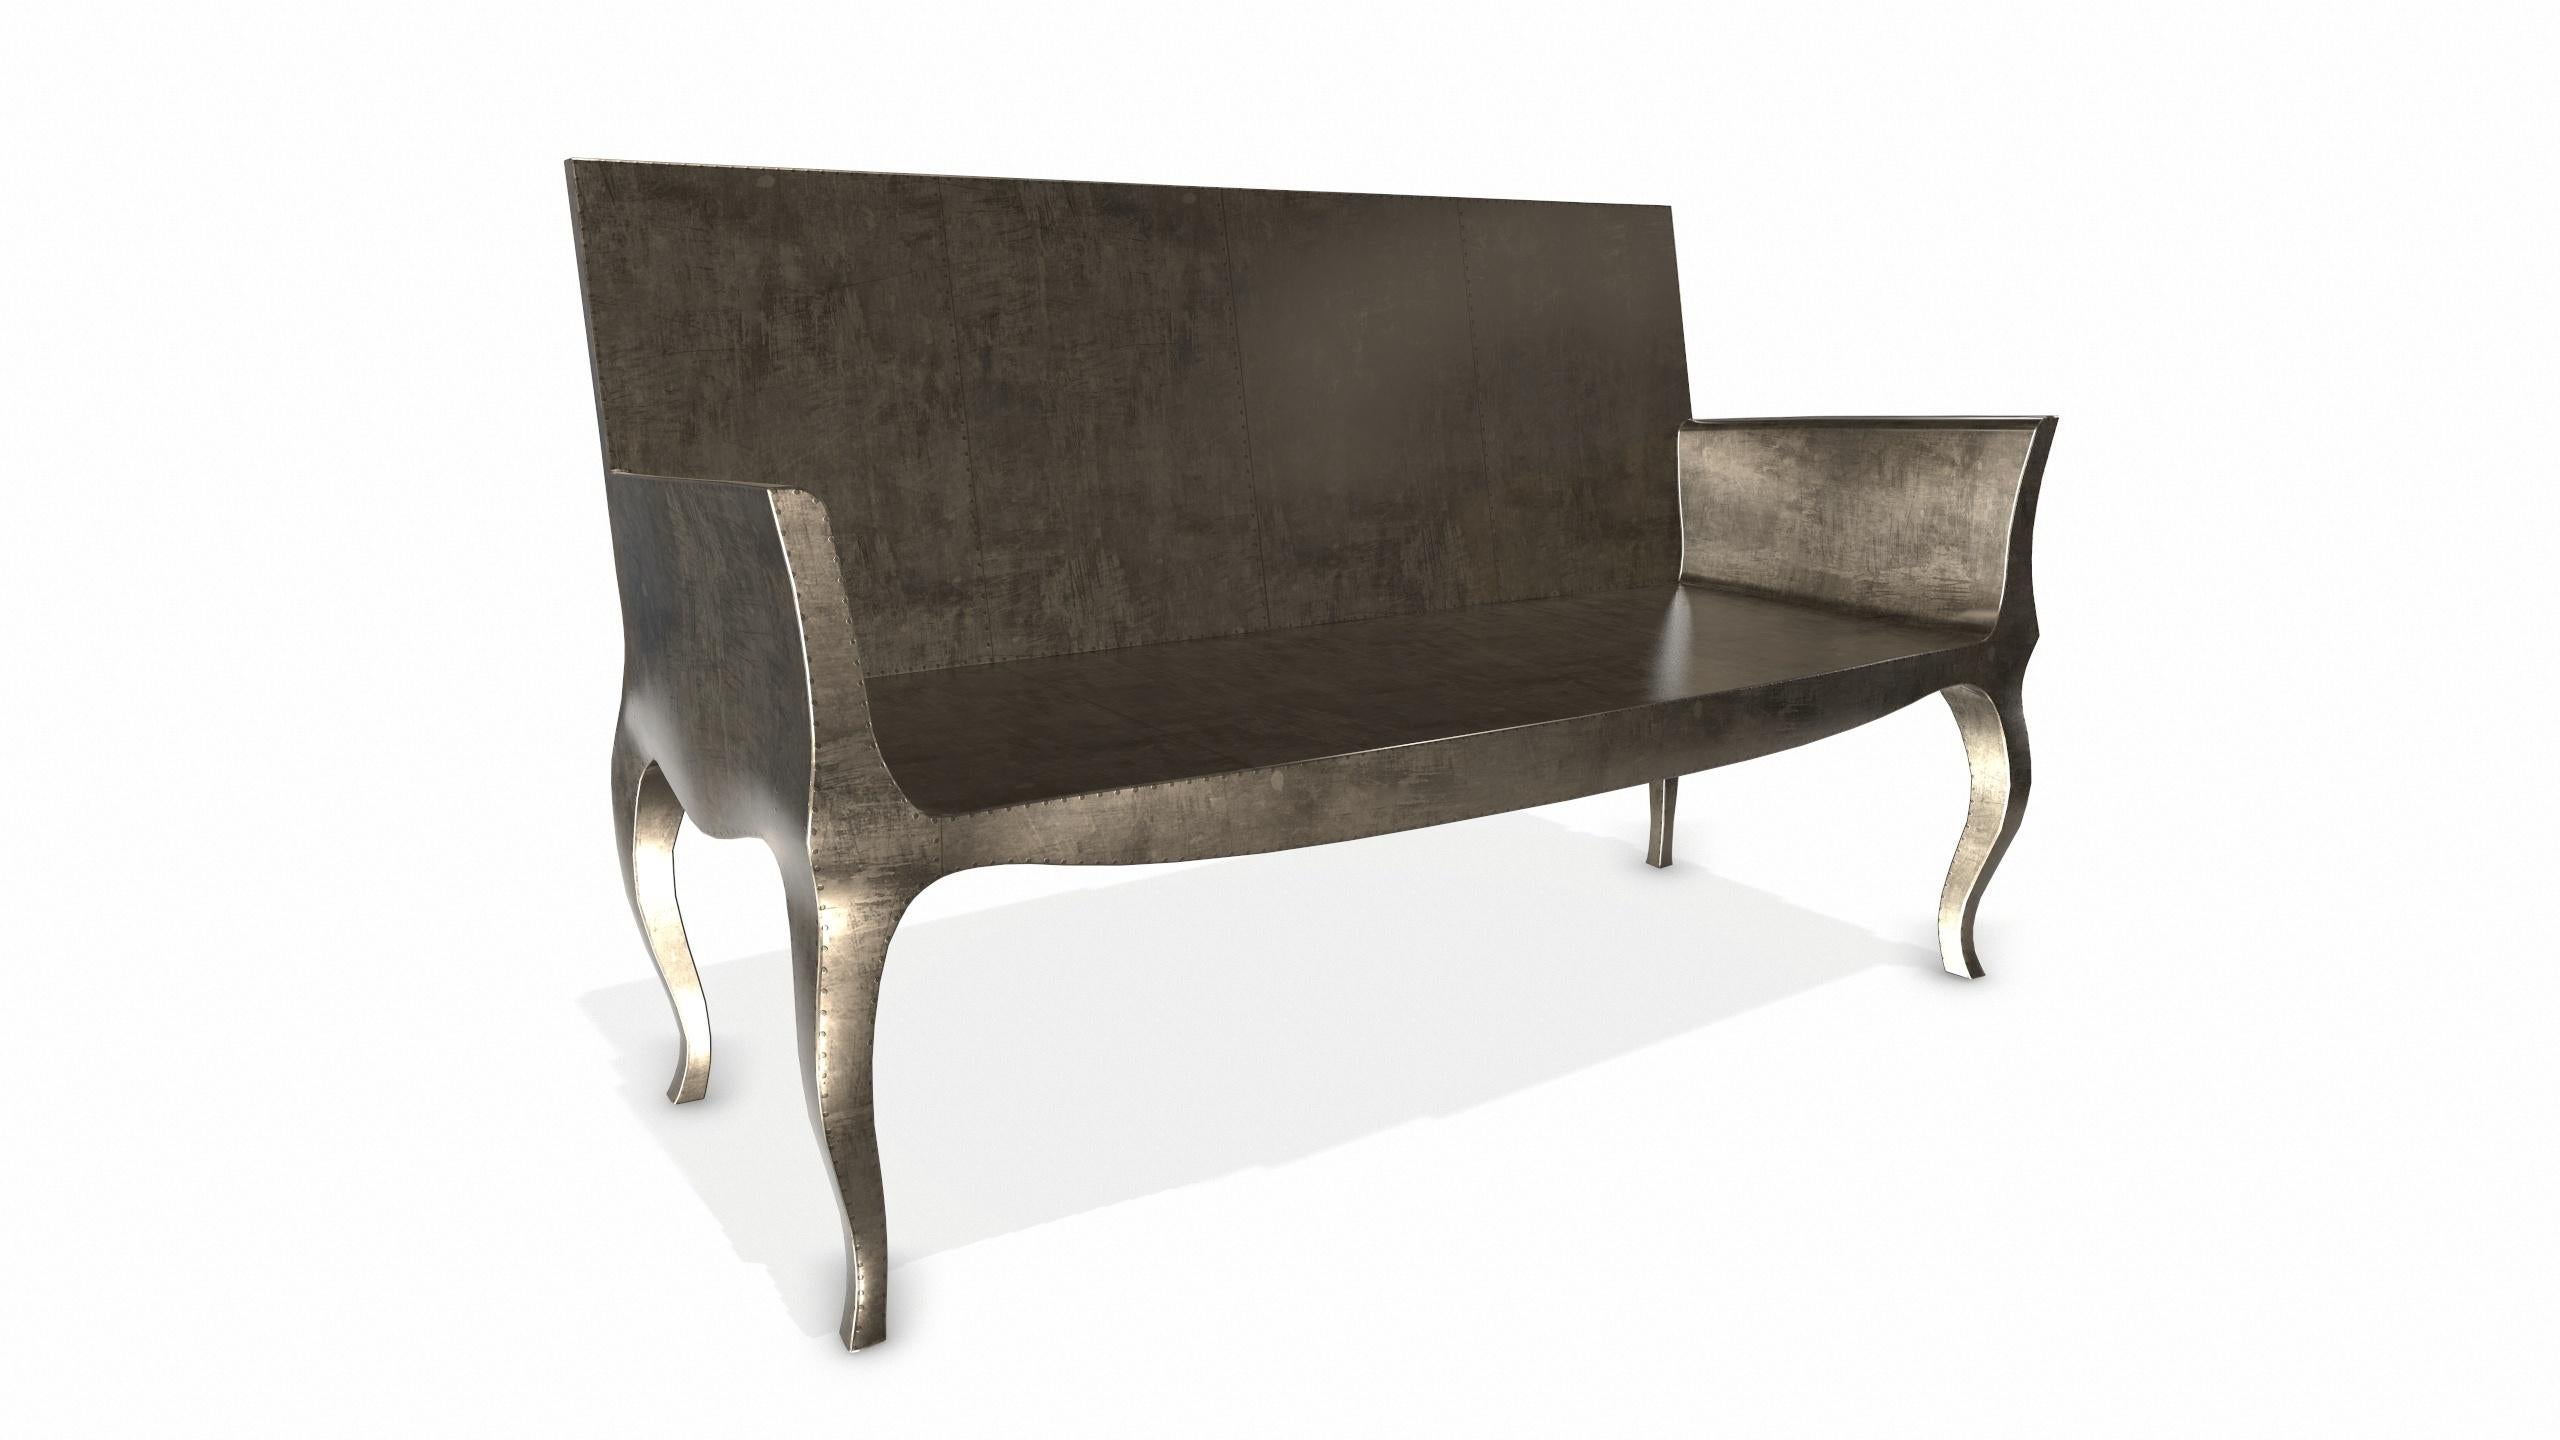 Contemporary Louise Settee Art Deco Chaise Longues in Smooth Antique Bronze by Paul Mathieu For Sale